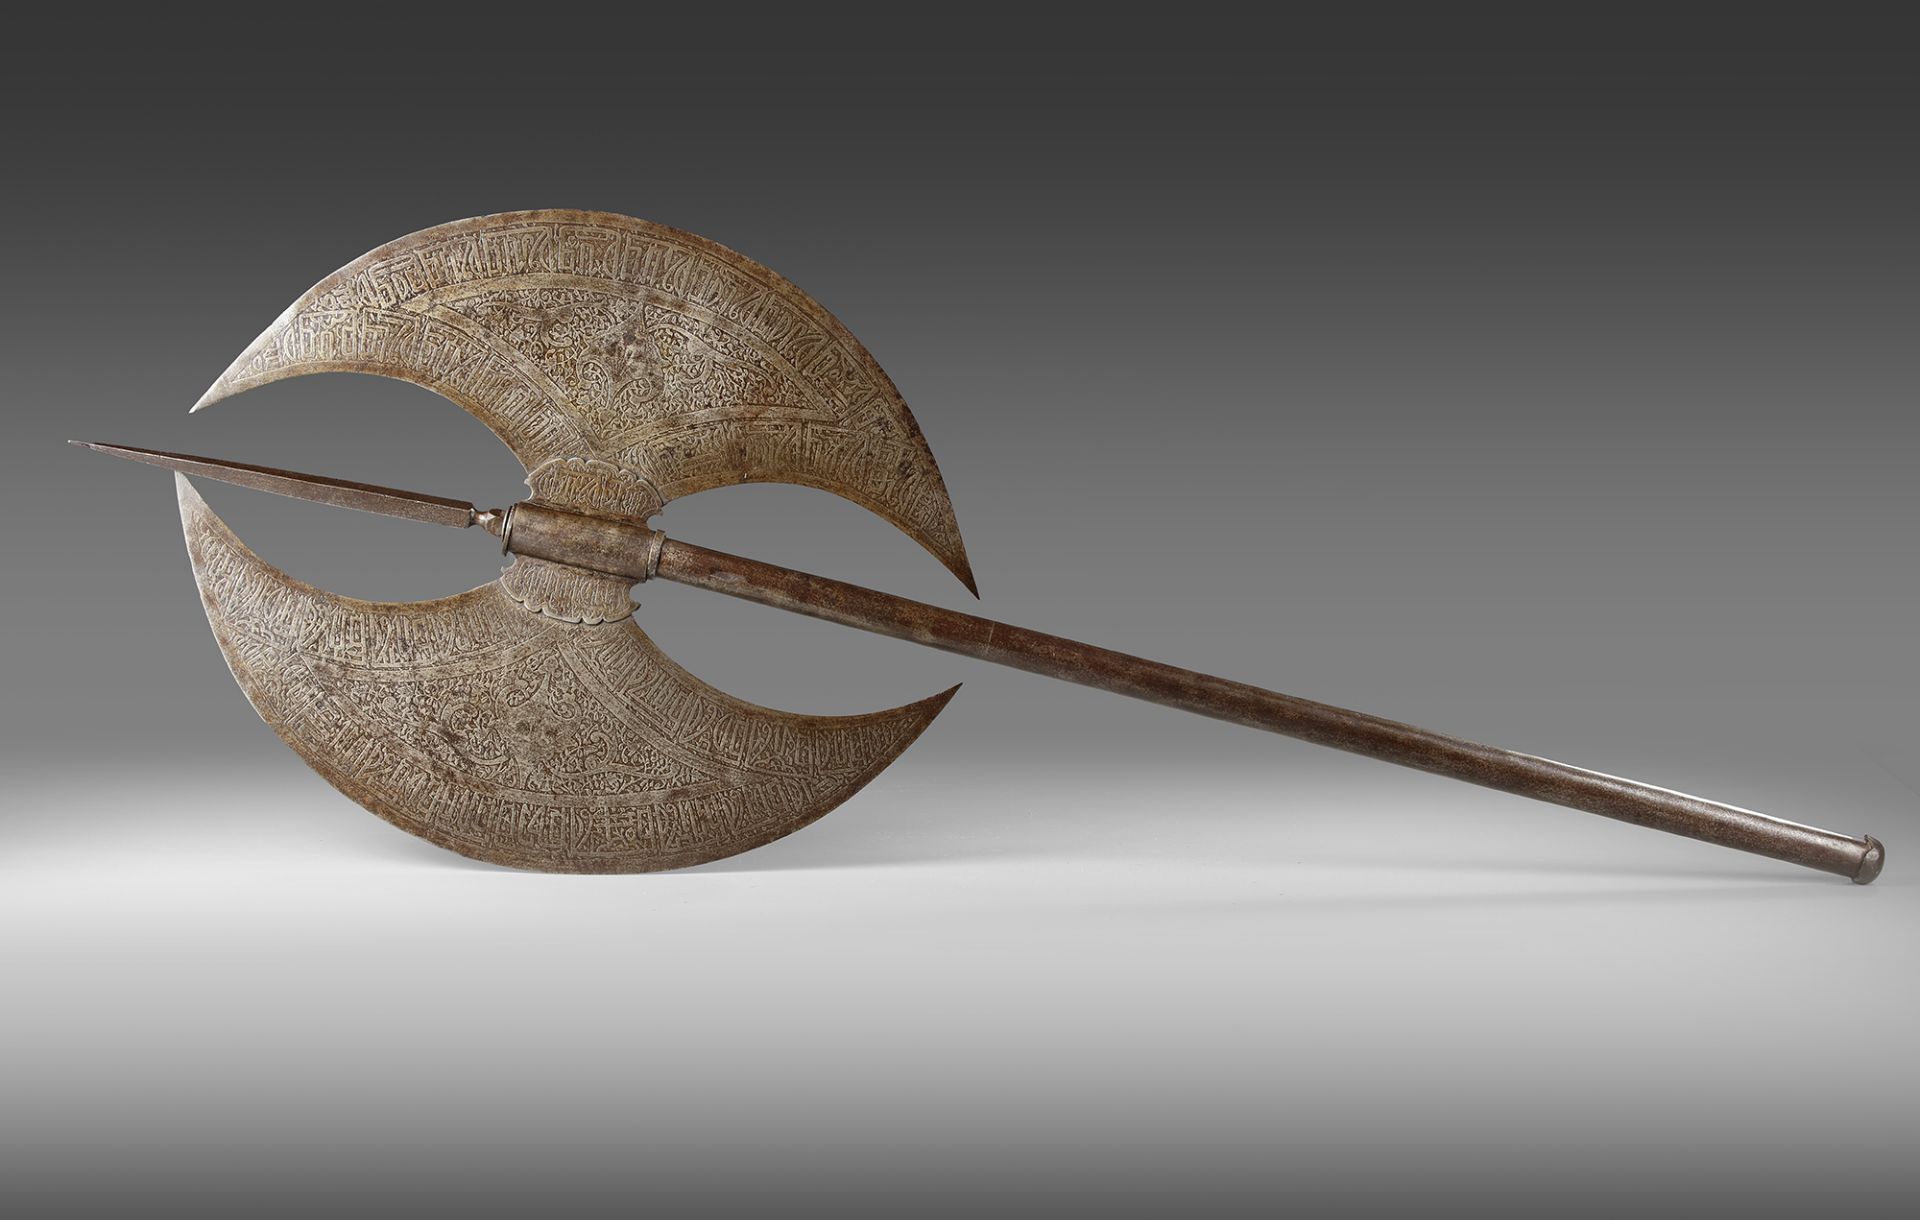 A LARGE QAJAR DOUBLE HEAD AXE, PERSIA, 19TH CENTURY - Image 2 of 3